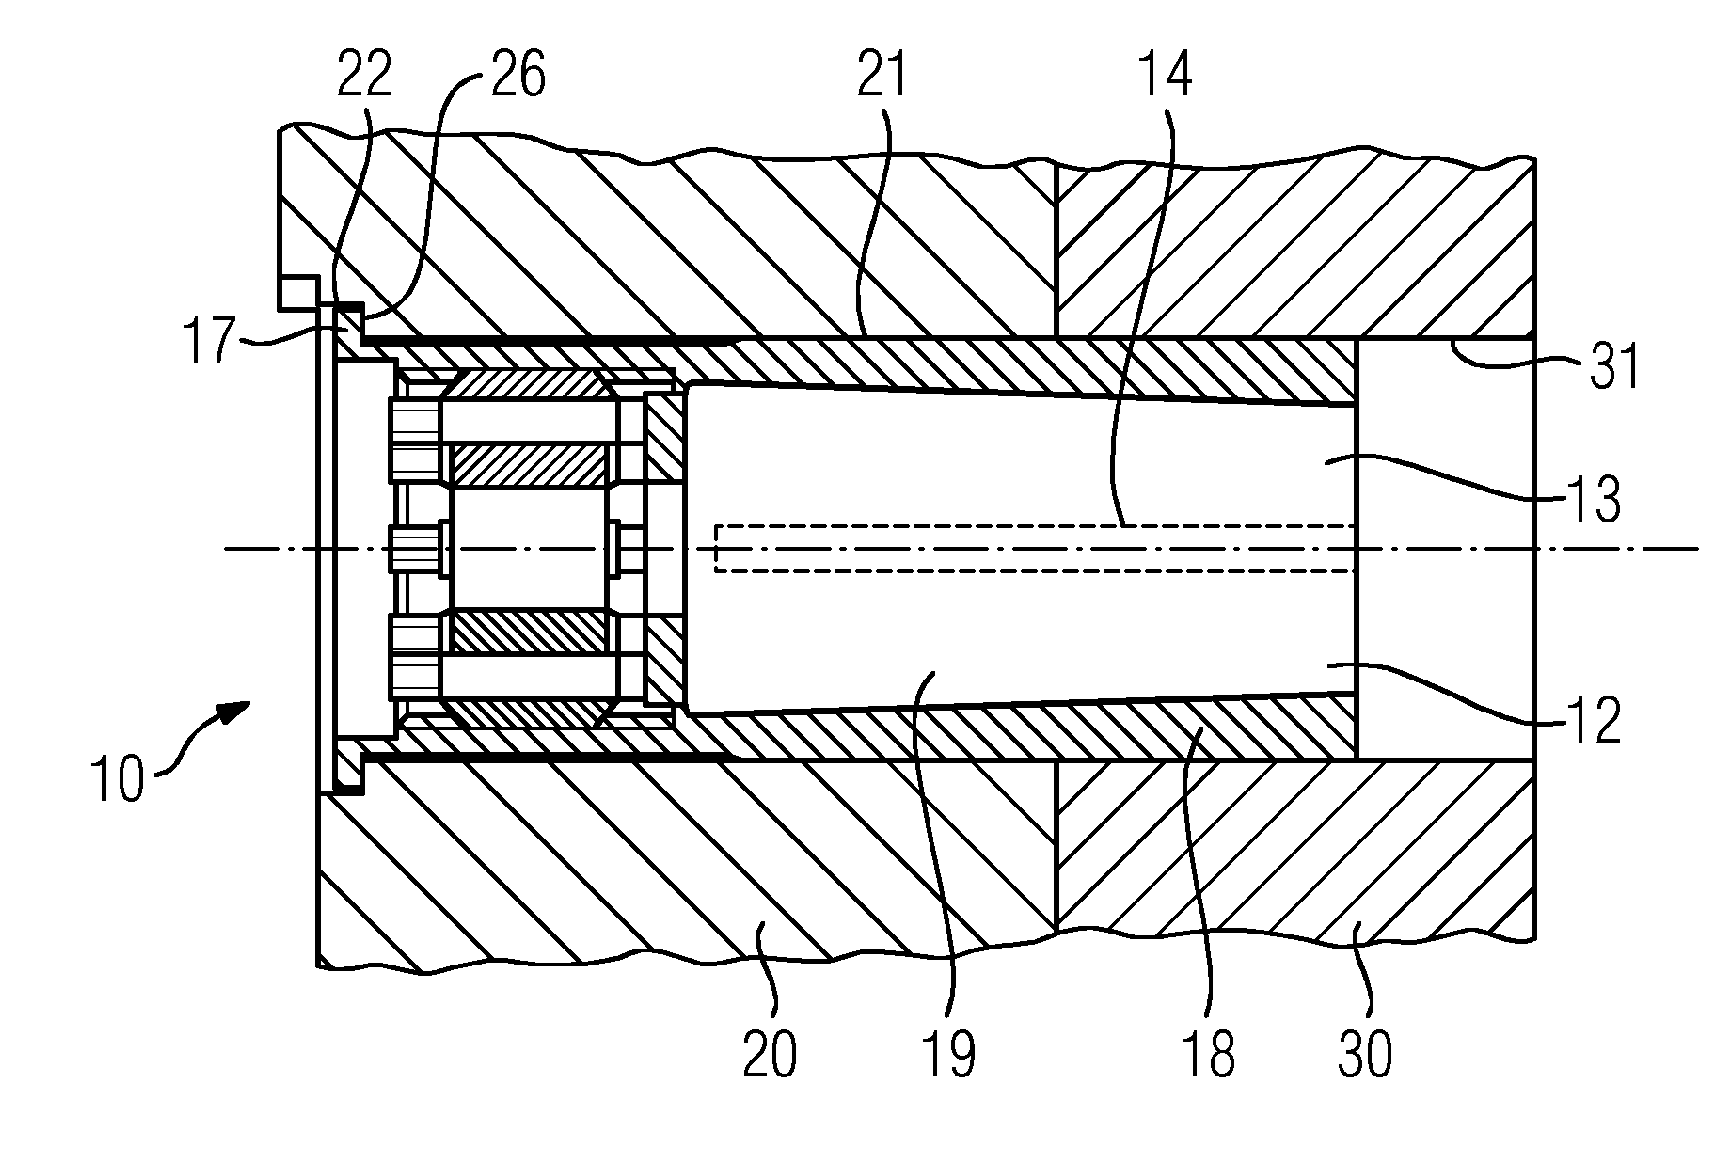 Coupling device for connecting a clutch to a turbine train